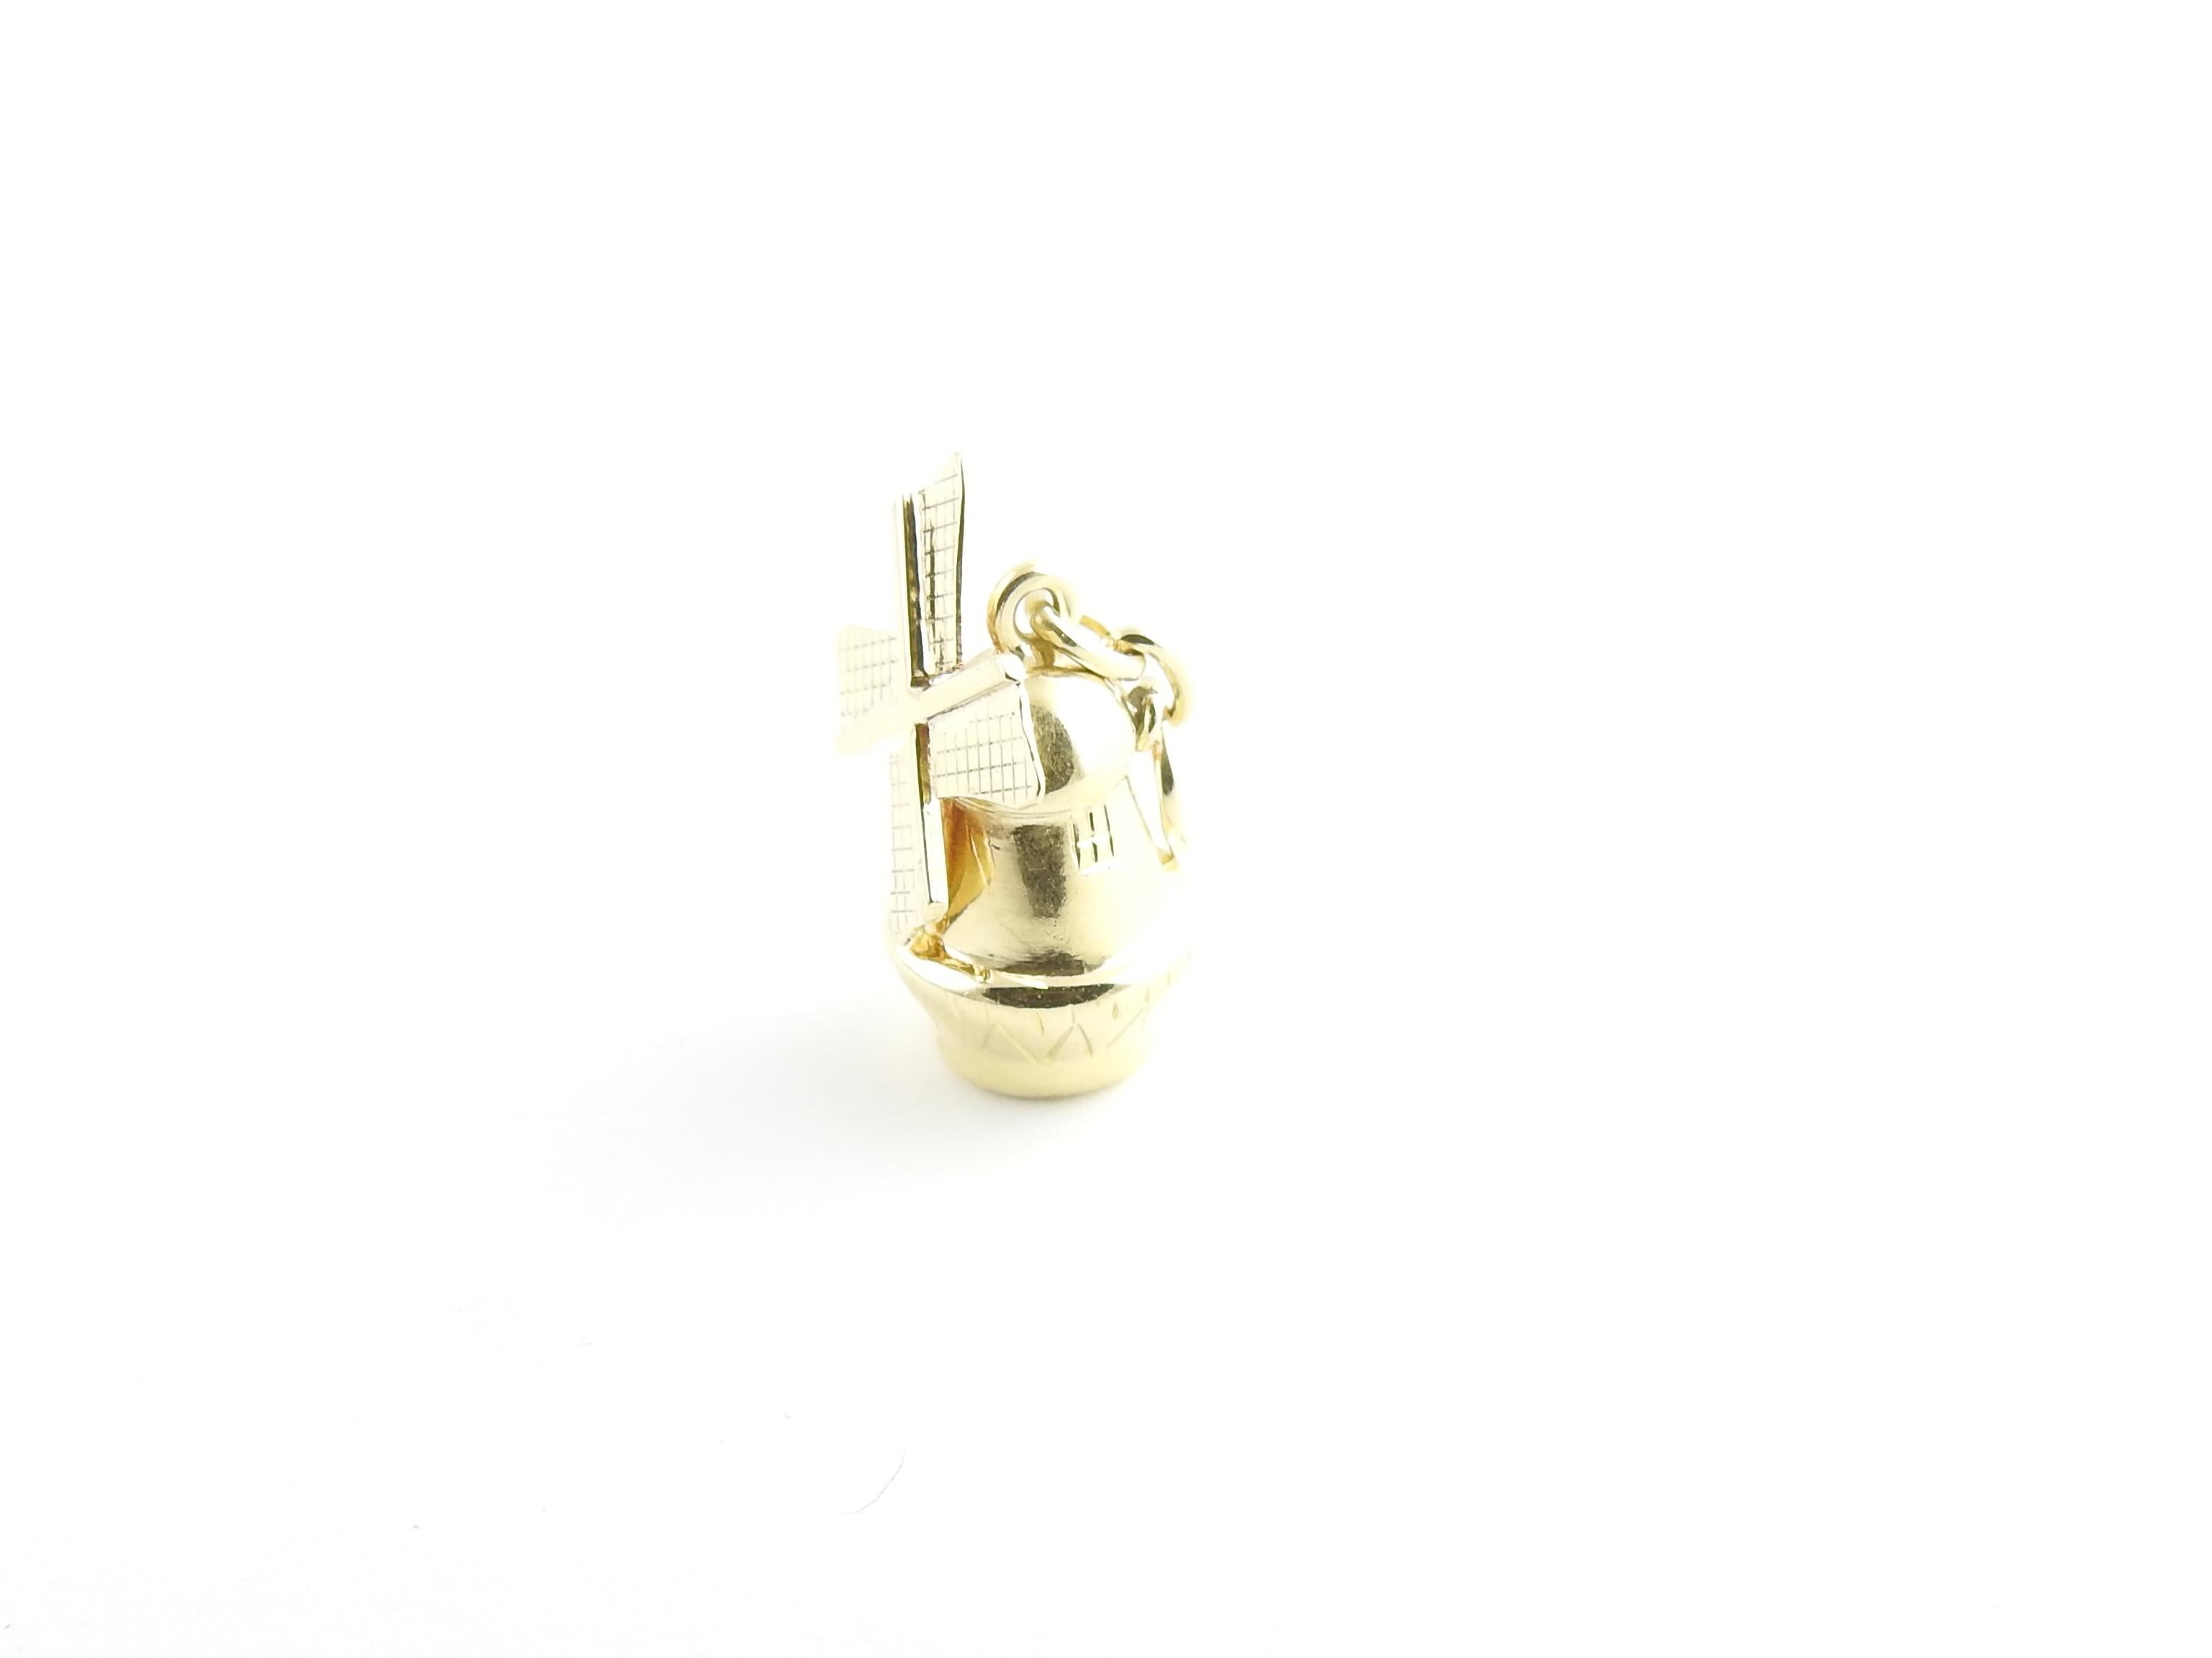 Vintage 14 Karat Yellow Gold Windmill Charm

This lovely 3D charm features a miniature windmill with blades that spin meticulously detailed in 14K yellow gold.

Size: 17 mm x 12 mm (actual charm)

Weight: 1.3 dwt. / 2.1 gr.

Acid tested for 14K